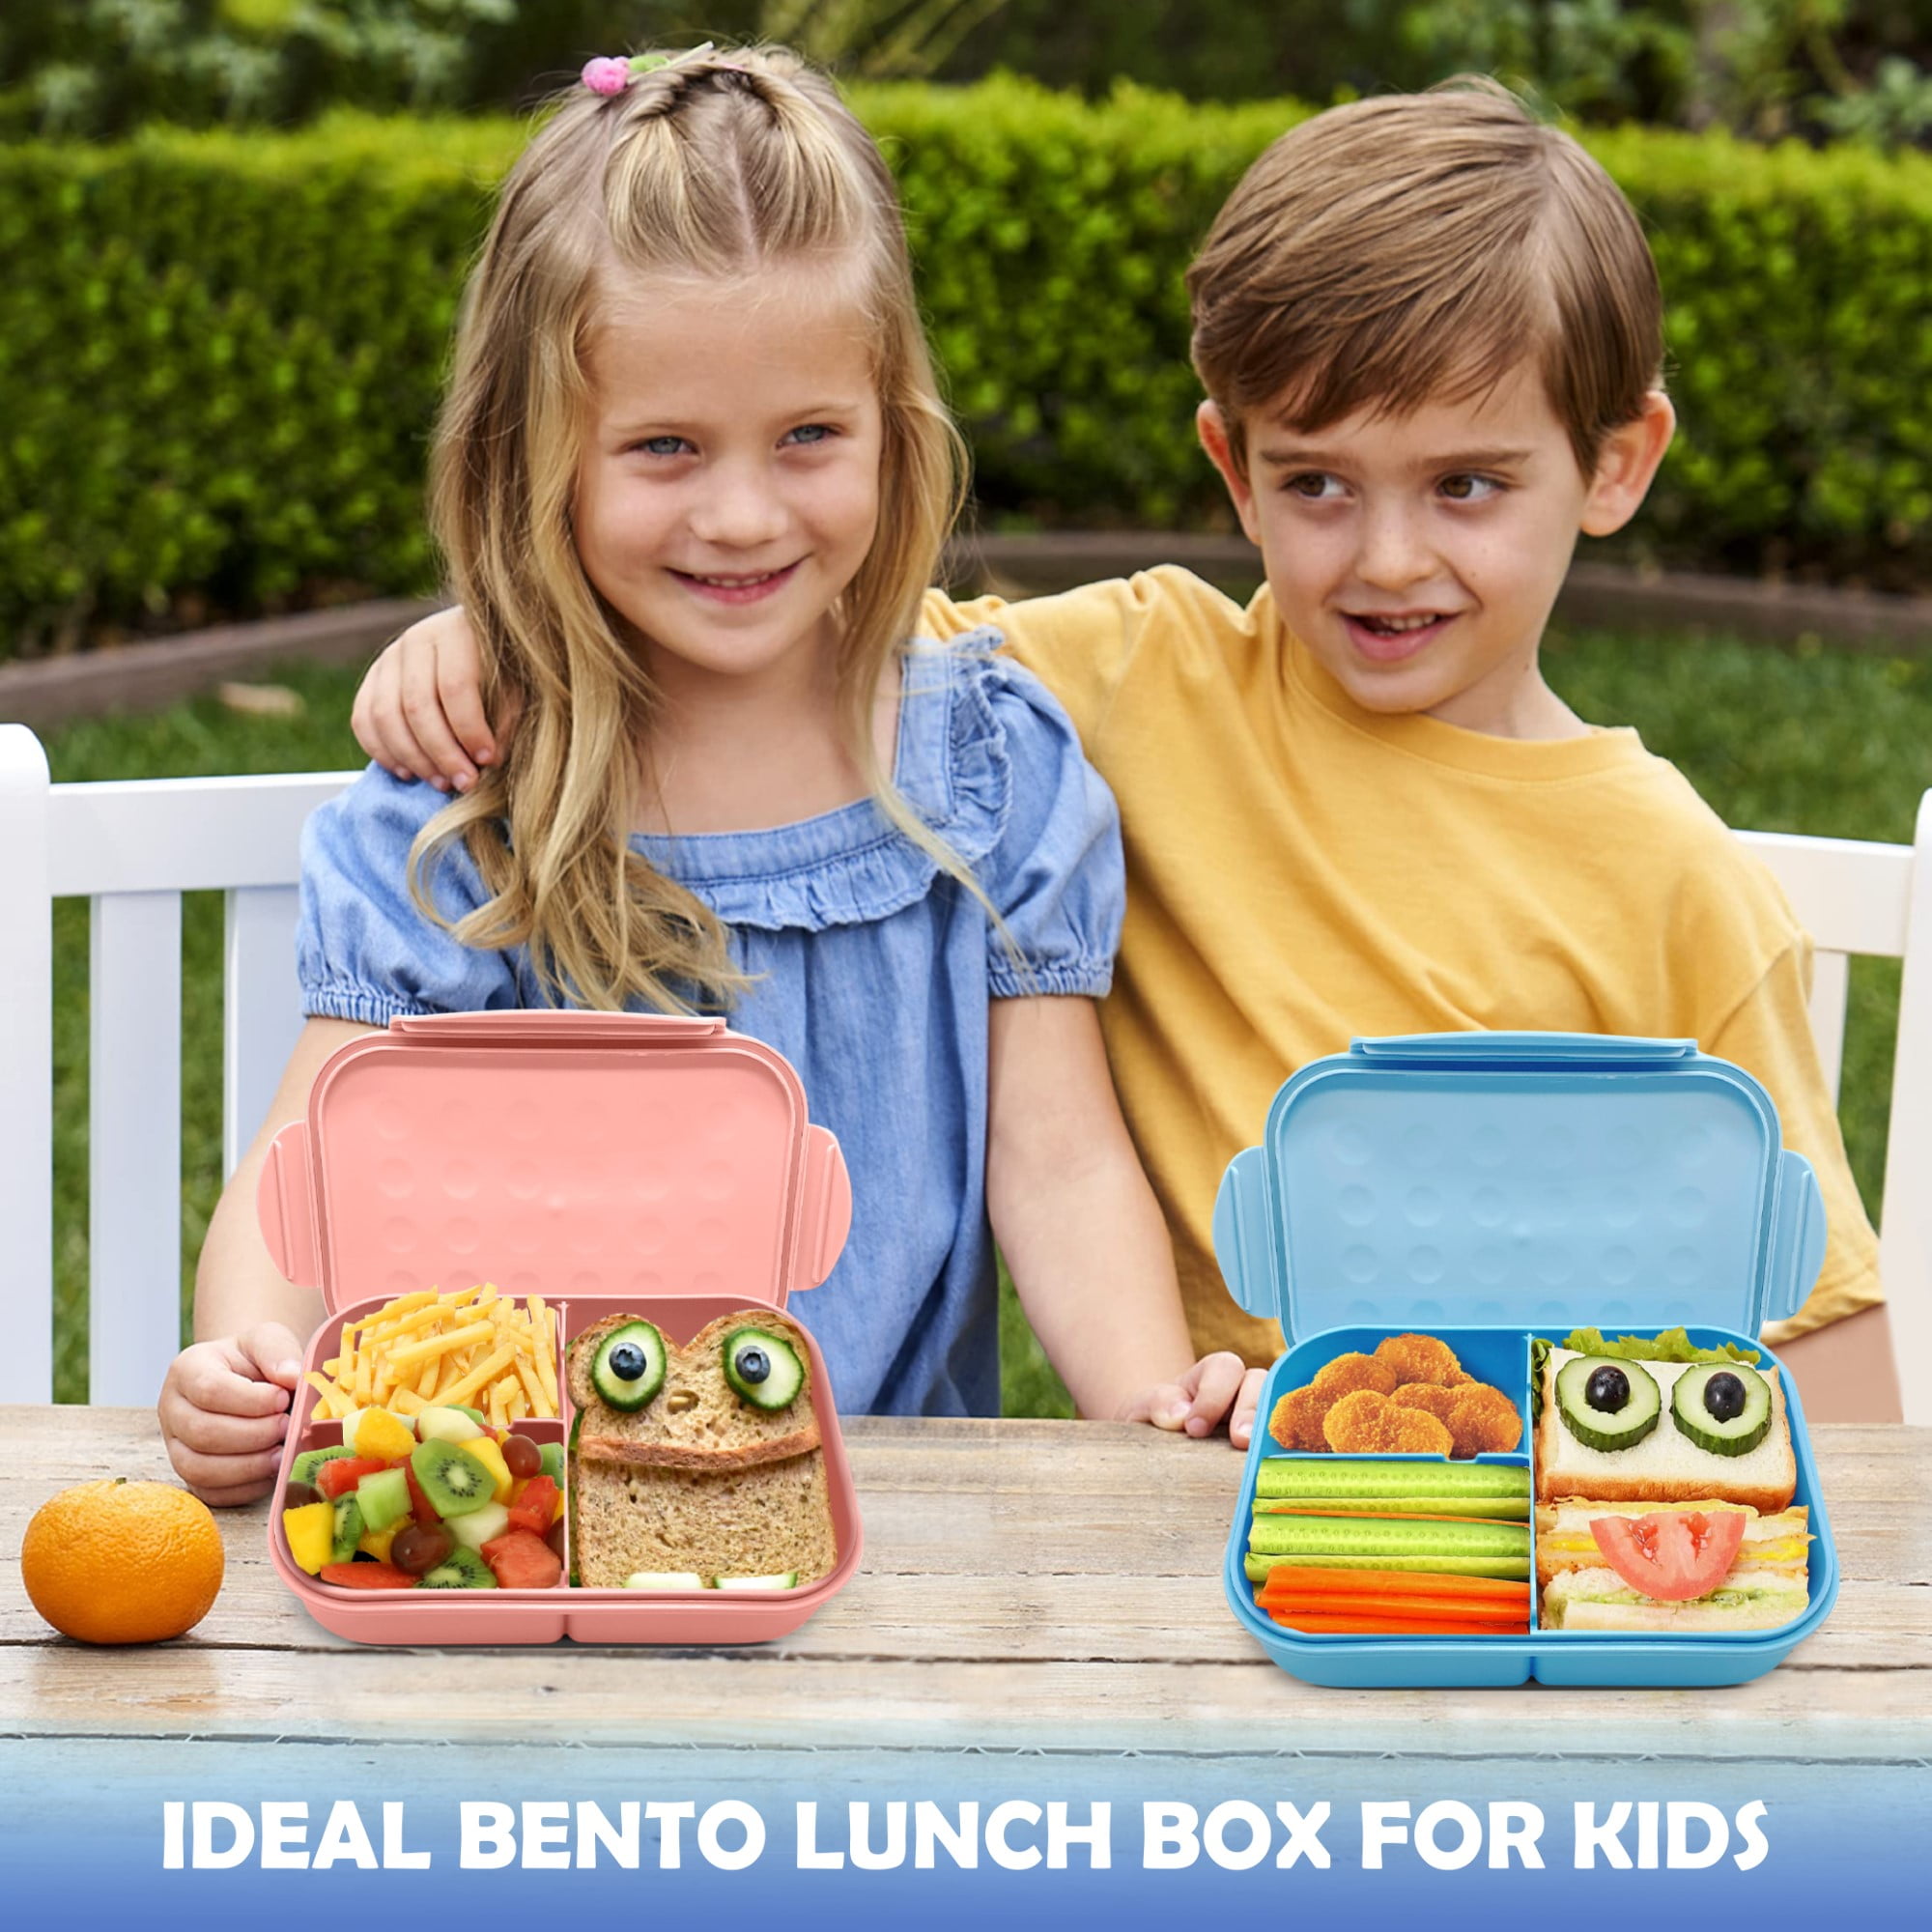 JSCORES Lunch Box for Adults, 1900 ml Children's Lunch Box with  Compartments, Leak-proof Bento Box, Snack Box for Picnic, Work, Travel  (Blue) for Sale in Los Angeles, CA - OfferUp